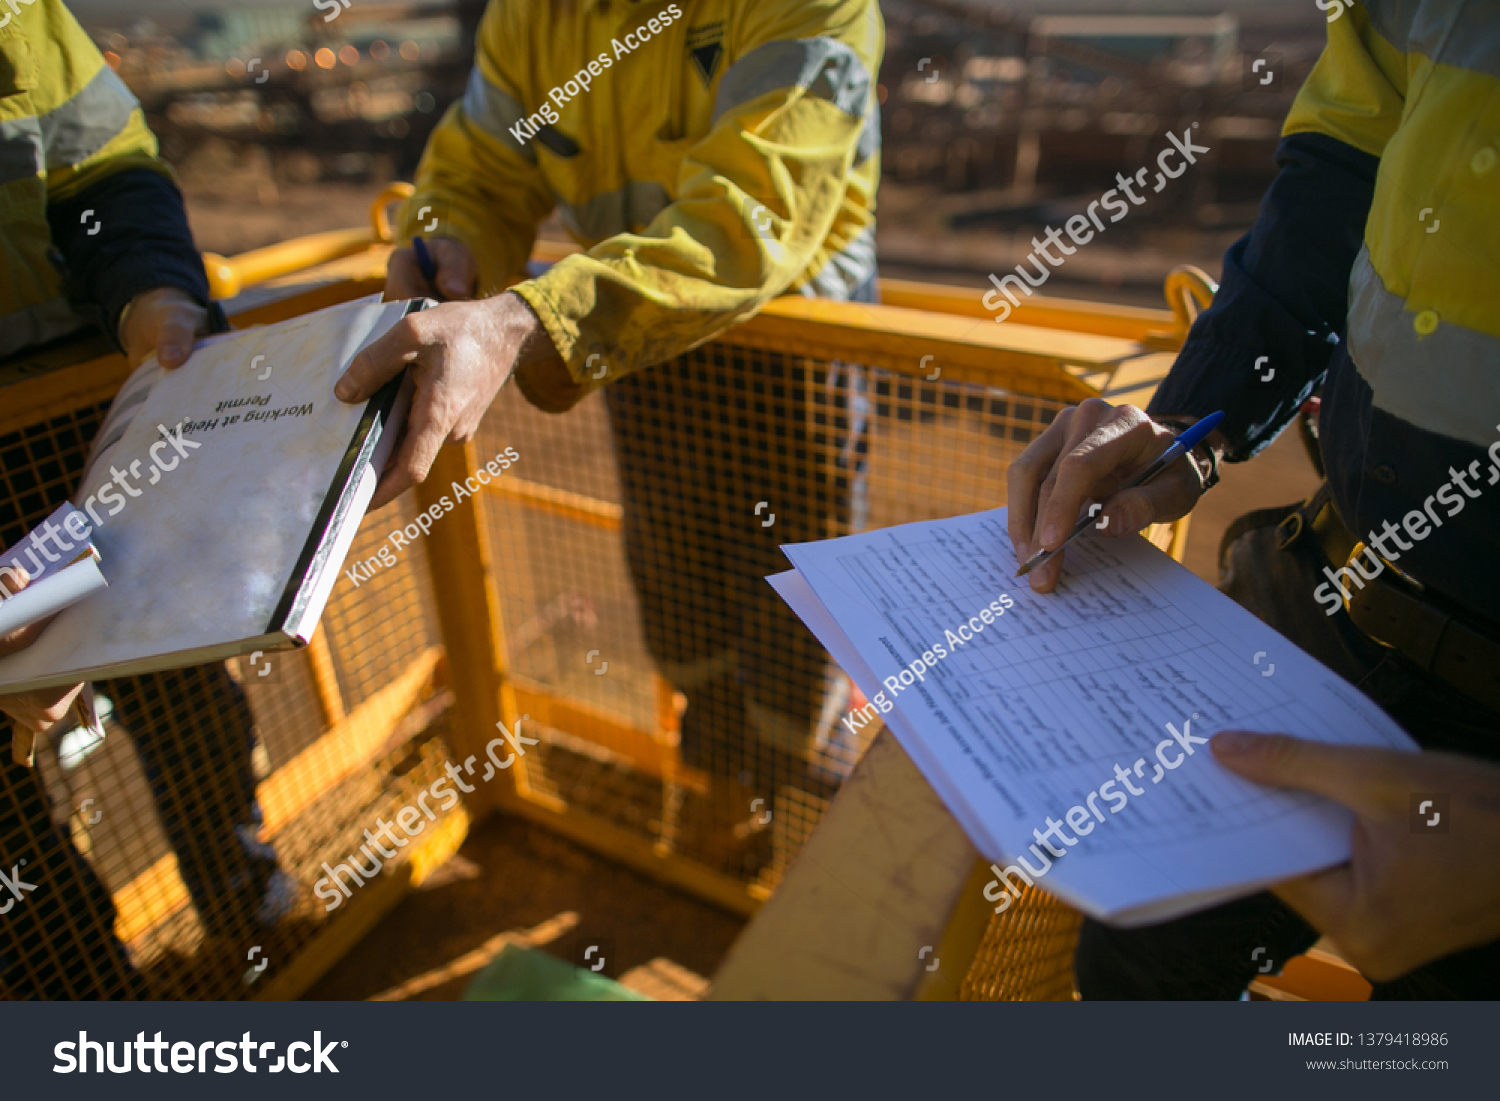 Trained supervisor safety auditor competent reviewing document issued sign approvals of working at height permit JSA risk assessment on site prior to performing high risk work mining construction site #1379418986